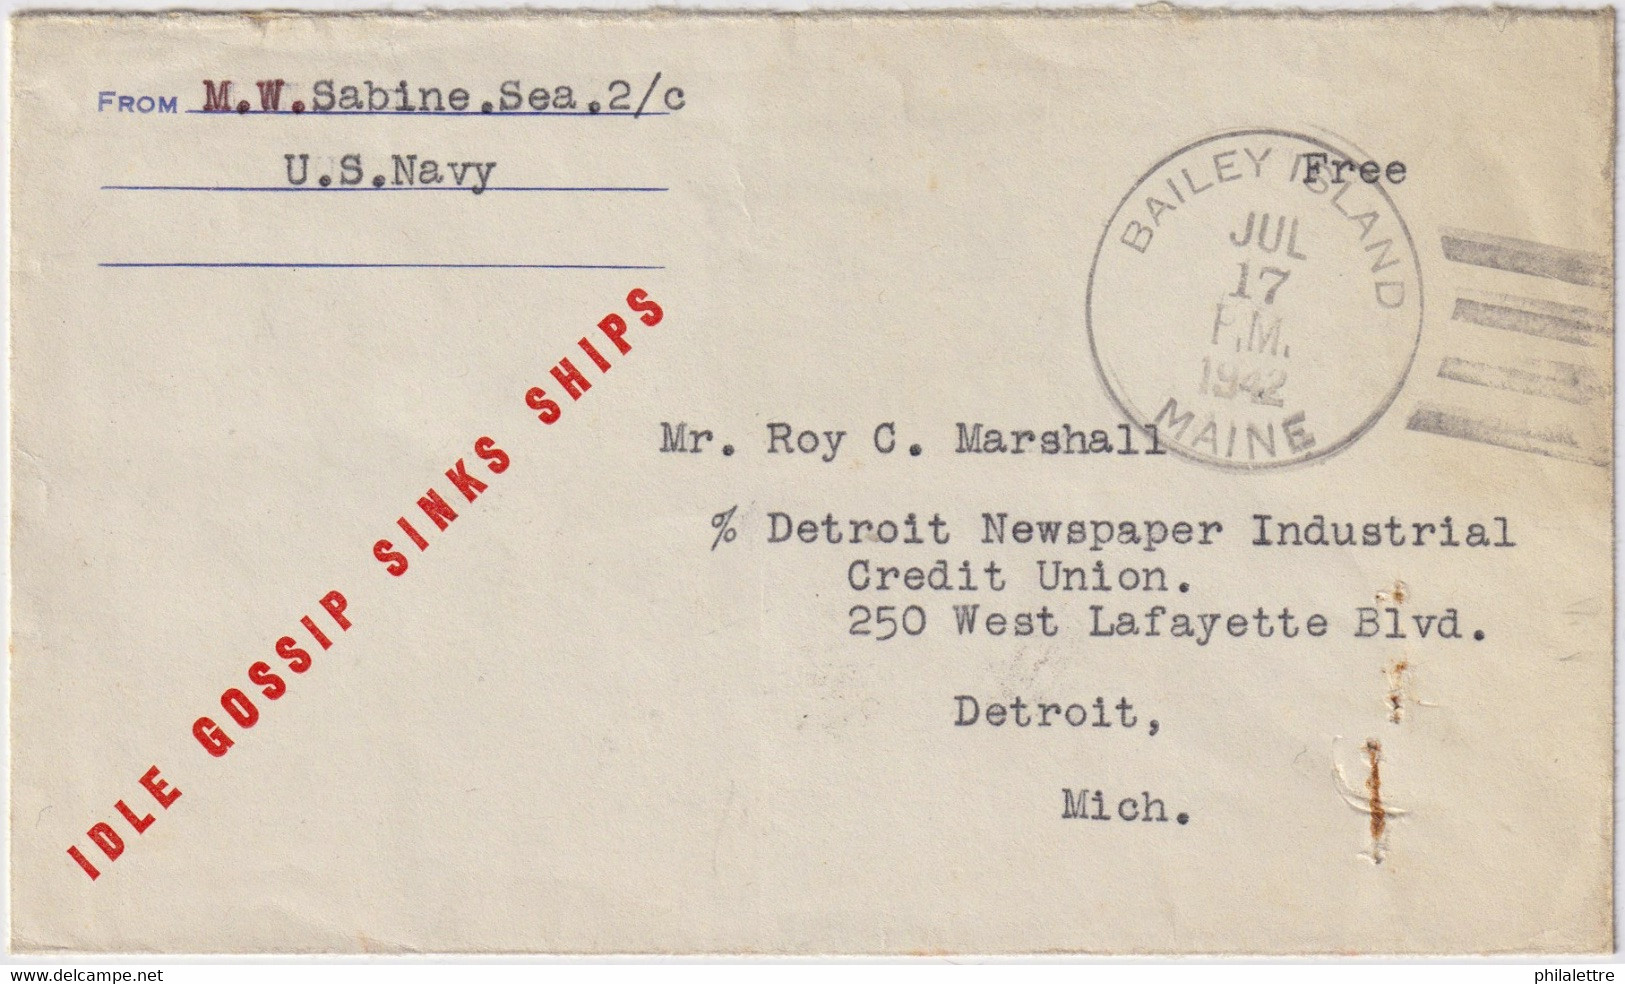 ÉTATS-UNIS / UNITED STATES - 1942 WWII NAVY Sailor's Mail Cover With "IDLE GOSSIP SINKS SHIPS" Slogan From BAILEY ISLAND - Storia Postale